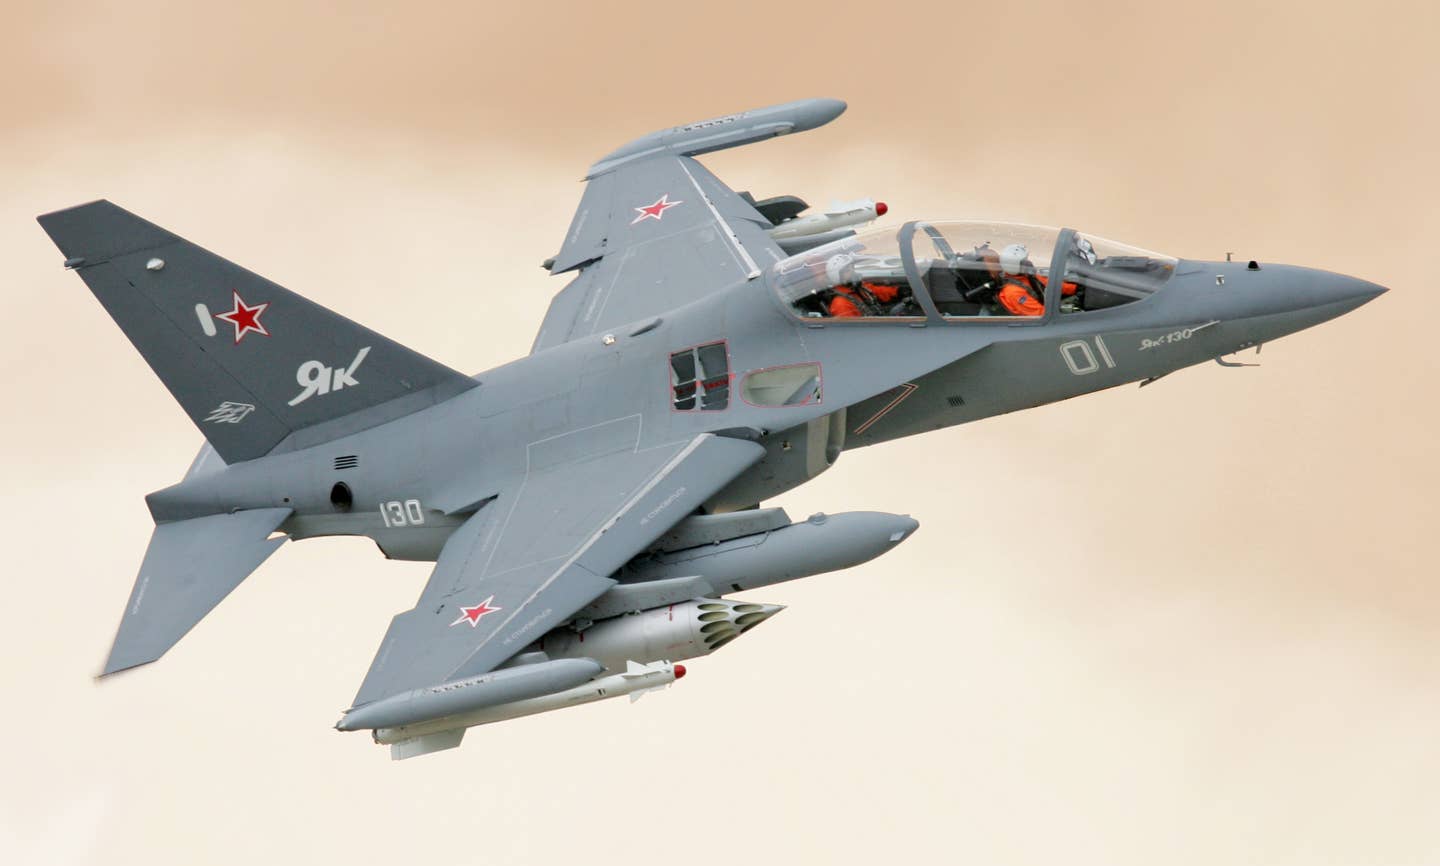 A Yak-130 "Mitten" of the Russian Air Force. <em>Russian Ministry of Defense</em>.